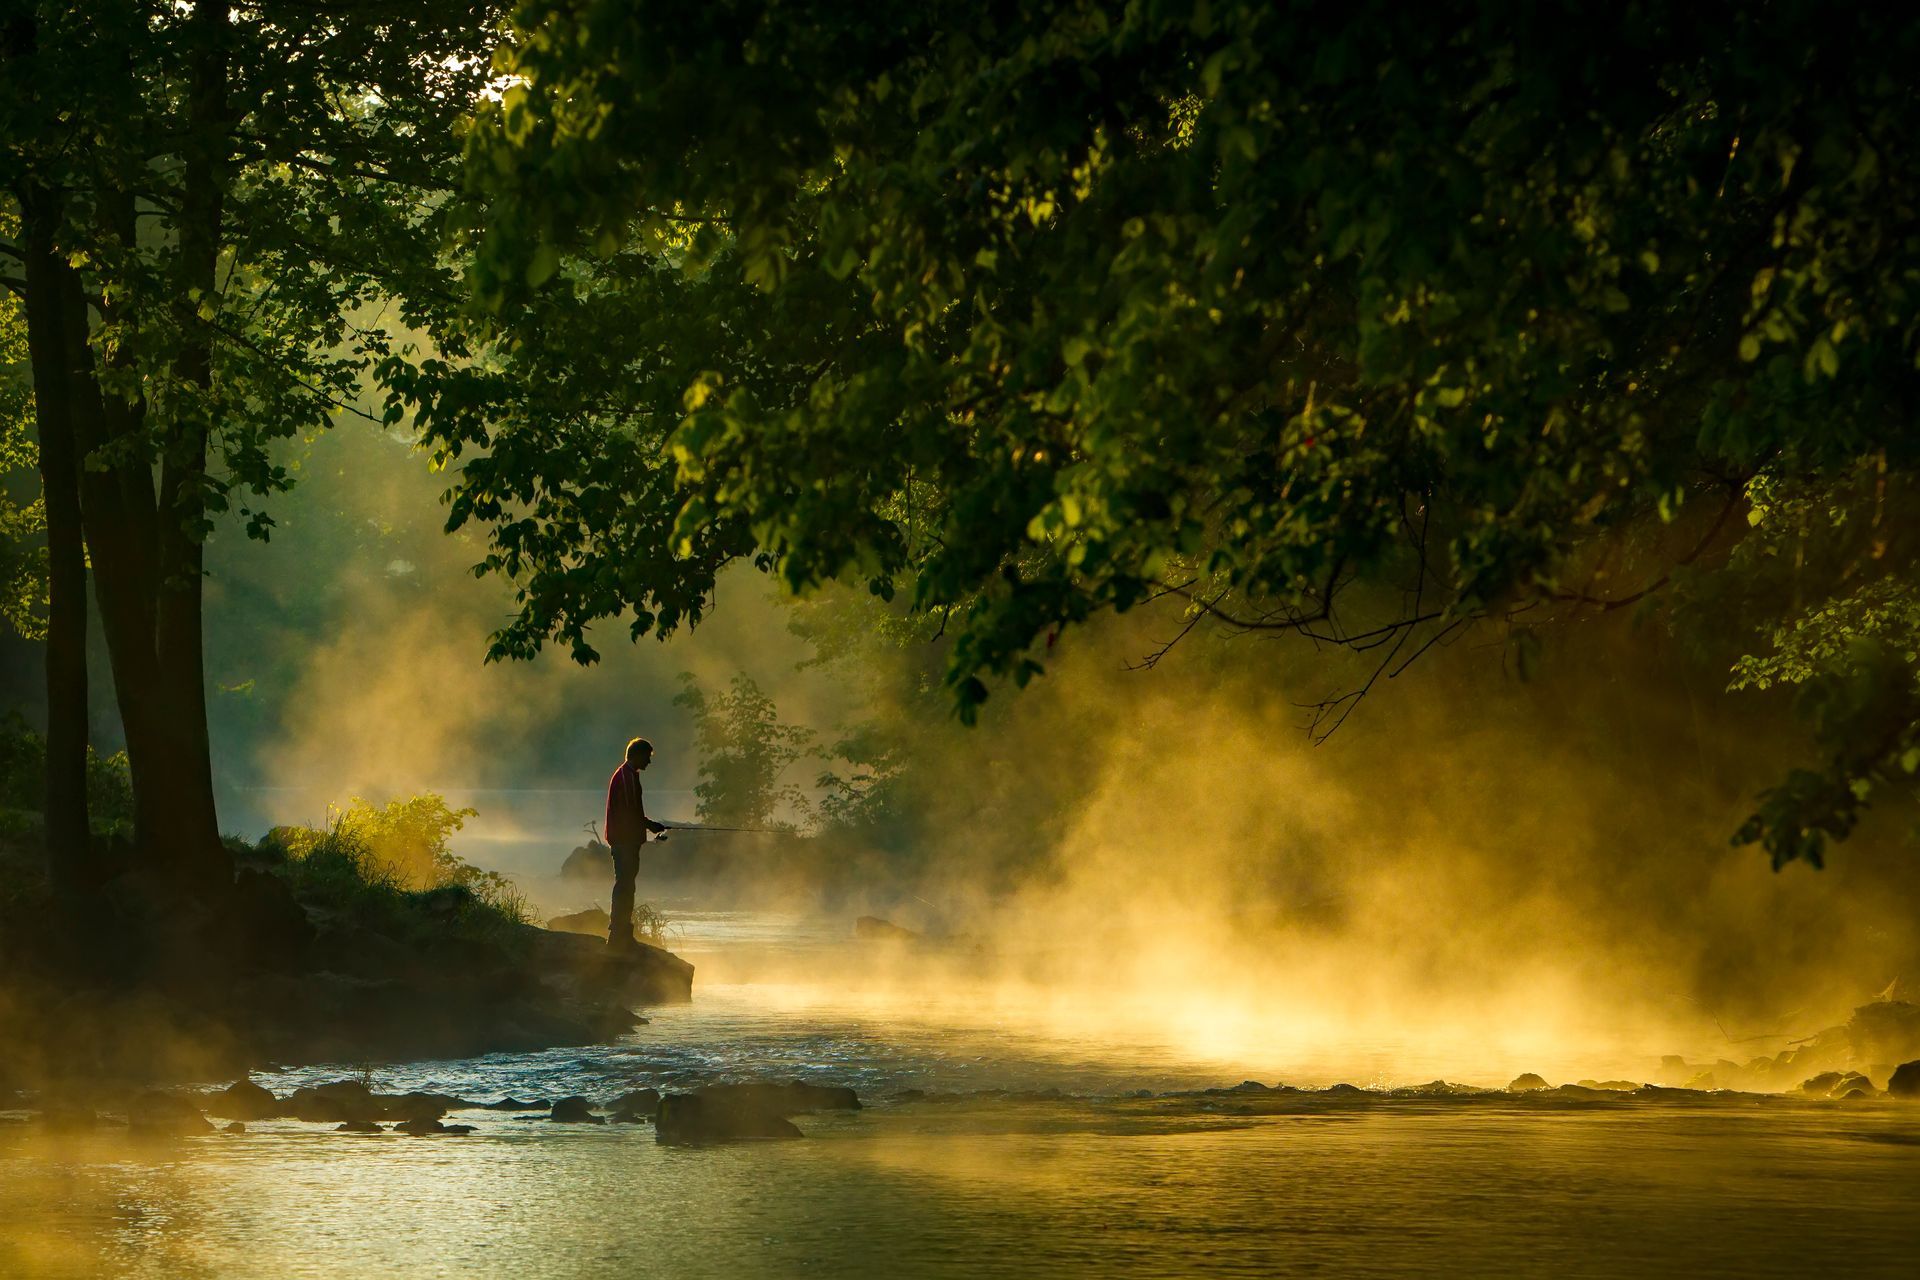 A man is fishing in a river in the woods at sunrise.